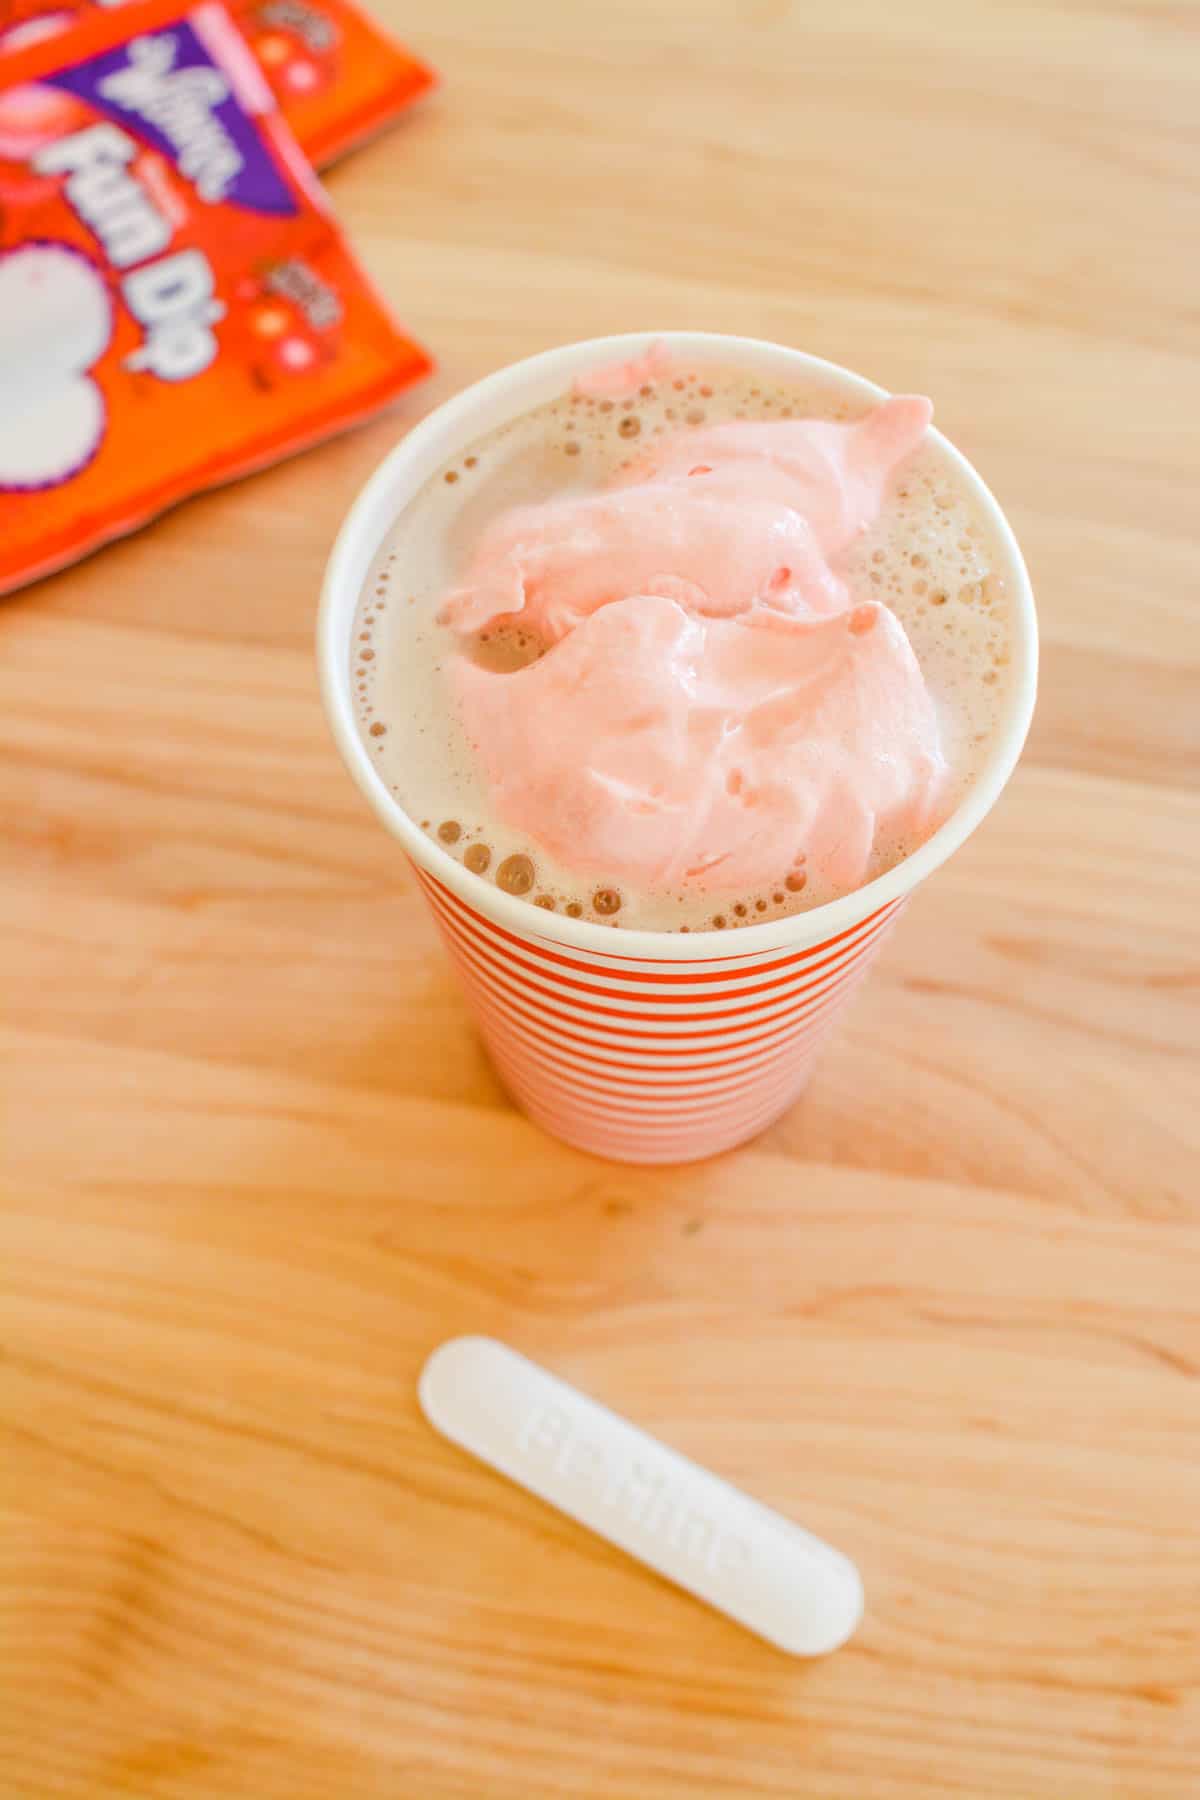 Cup of hot chocolate topped with pink whipped cream on a counter next to Fun Dip Candy.